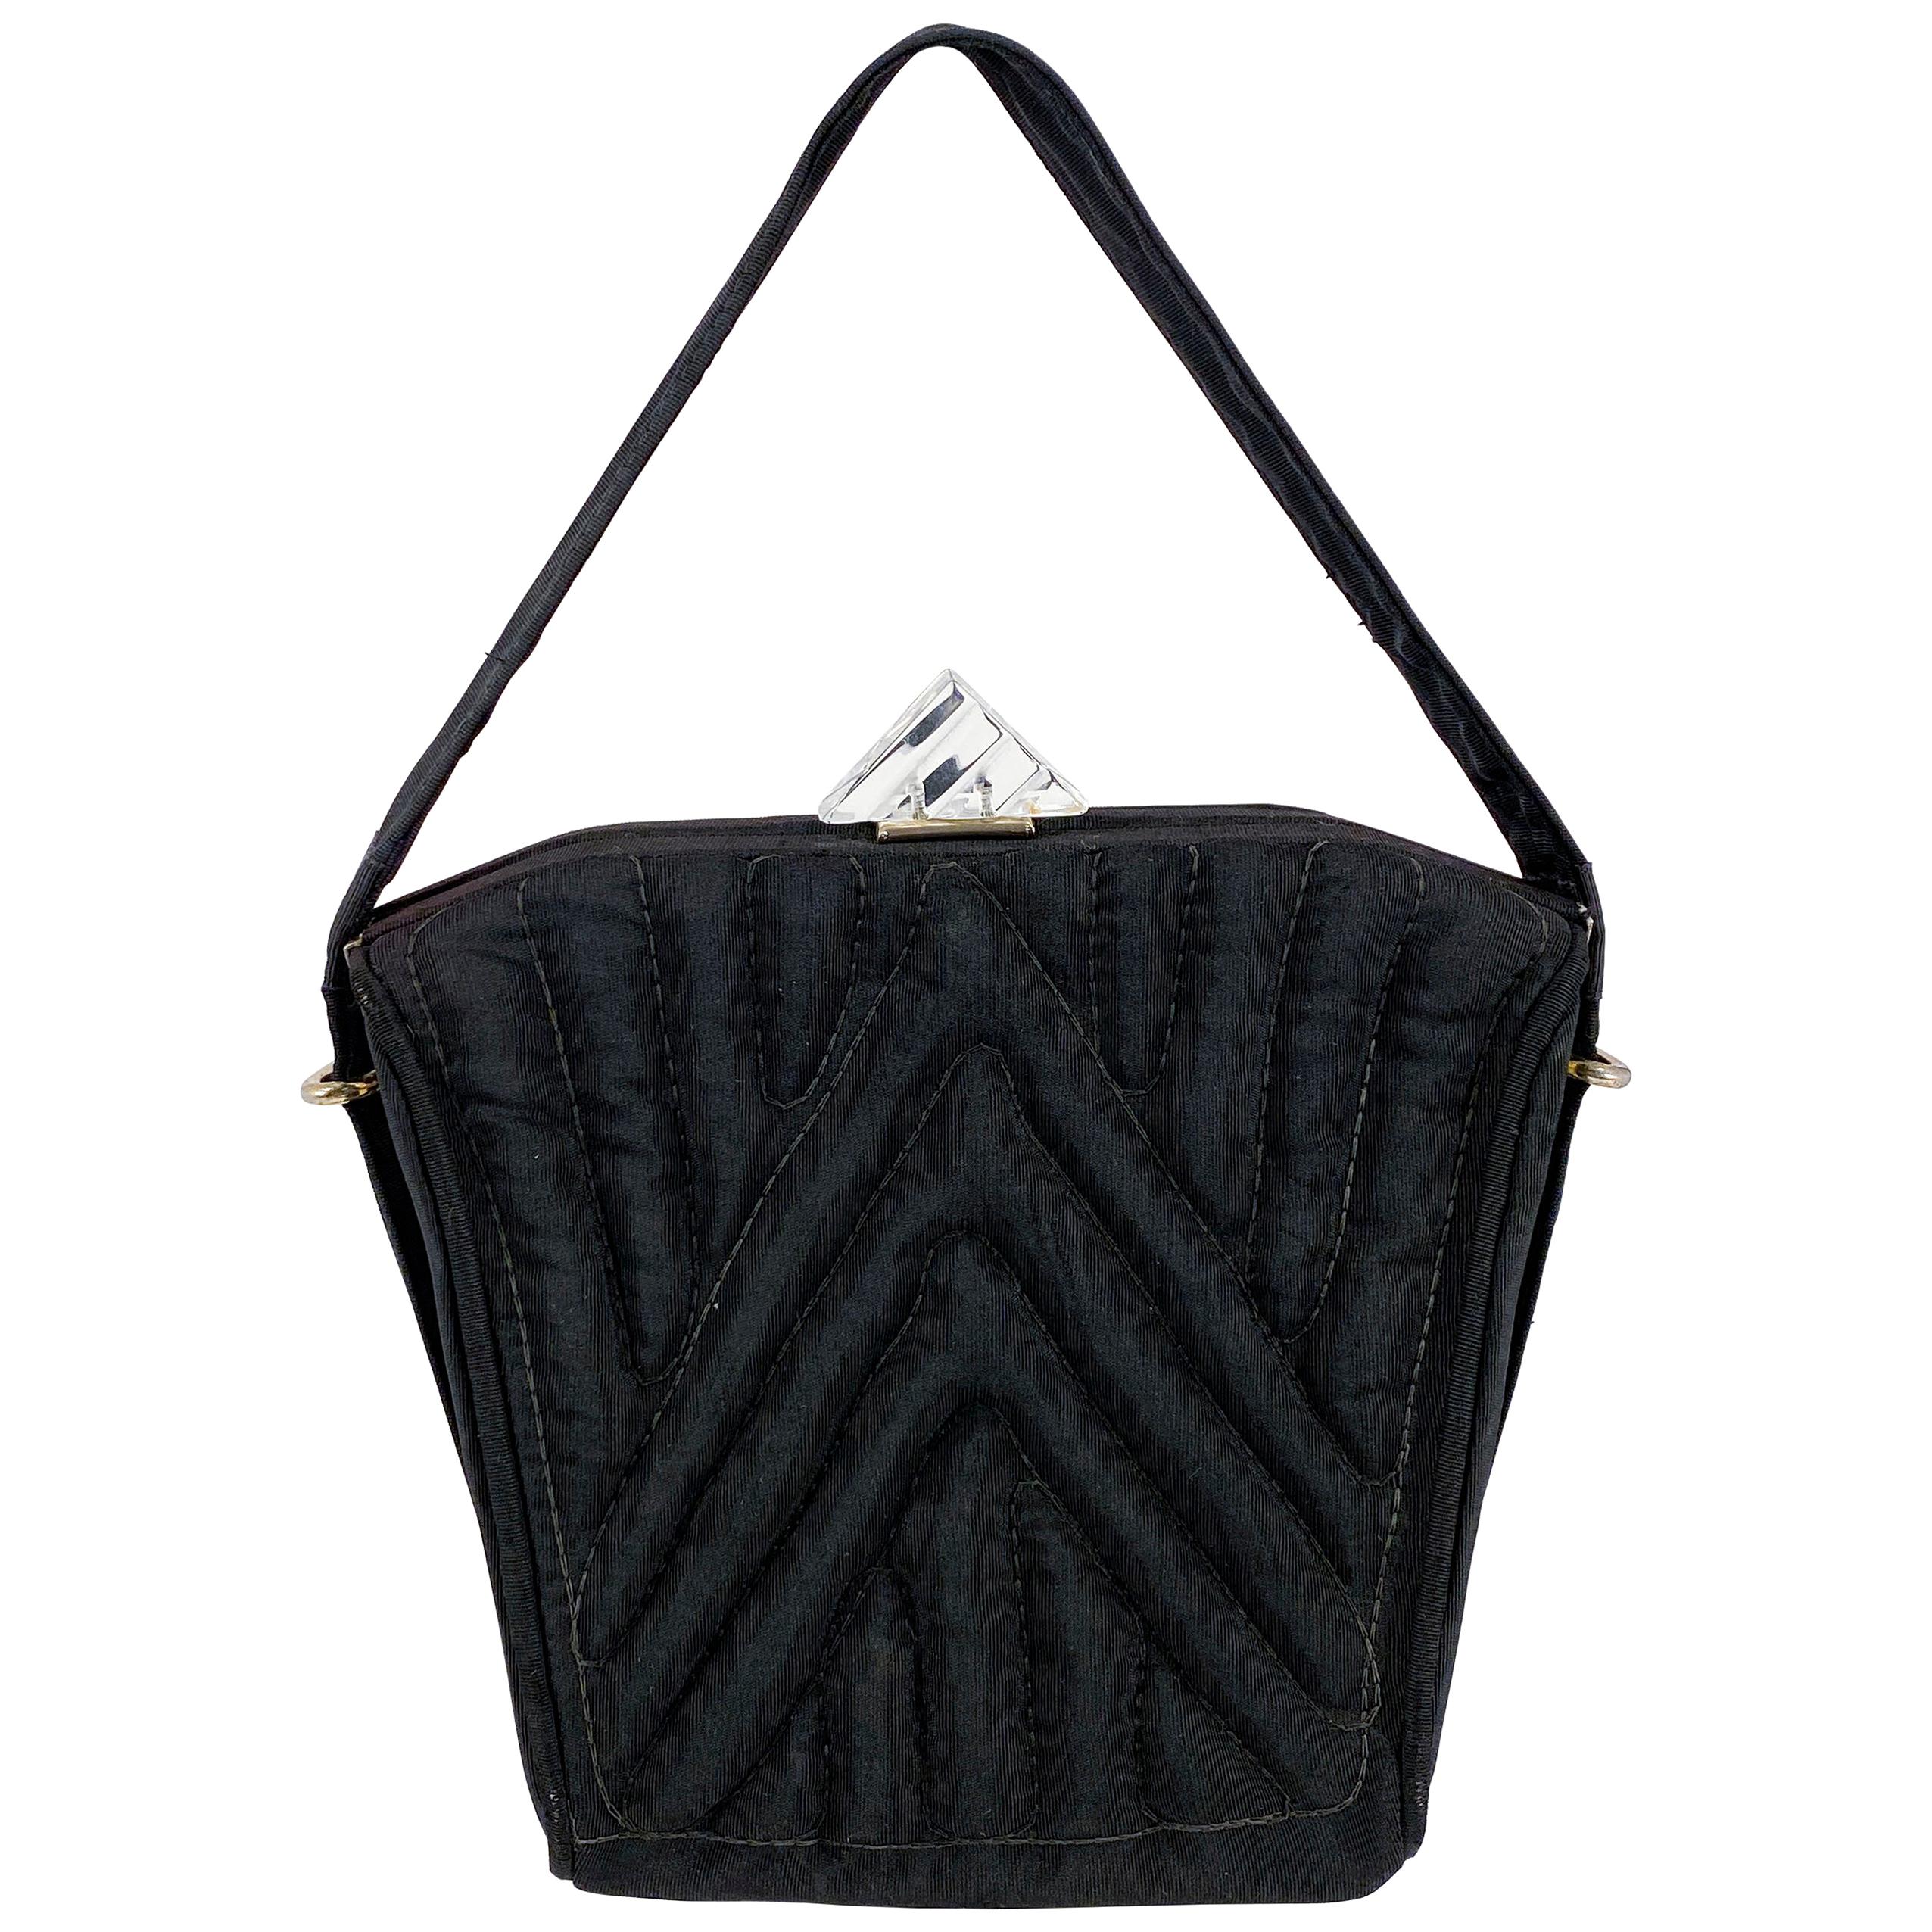 1930s Black Twill Quilted Trapunto Handbag with Lucite Closure